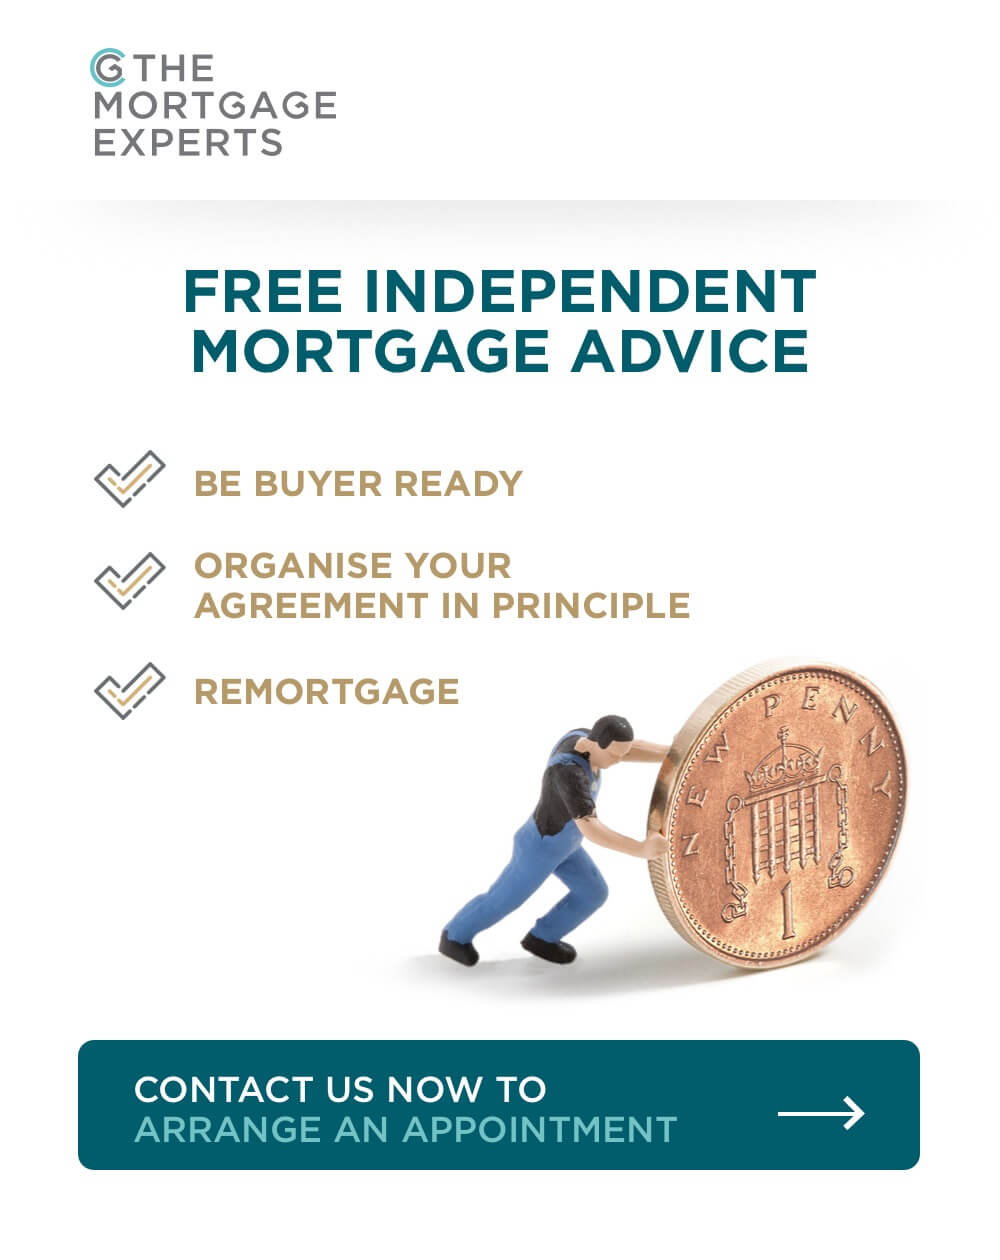 Free Independent Mortgage Advice - Contact us now to arrange an appointment (Click here)